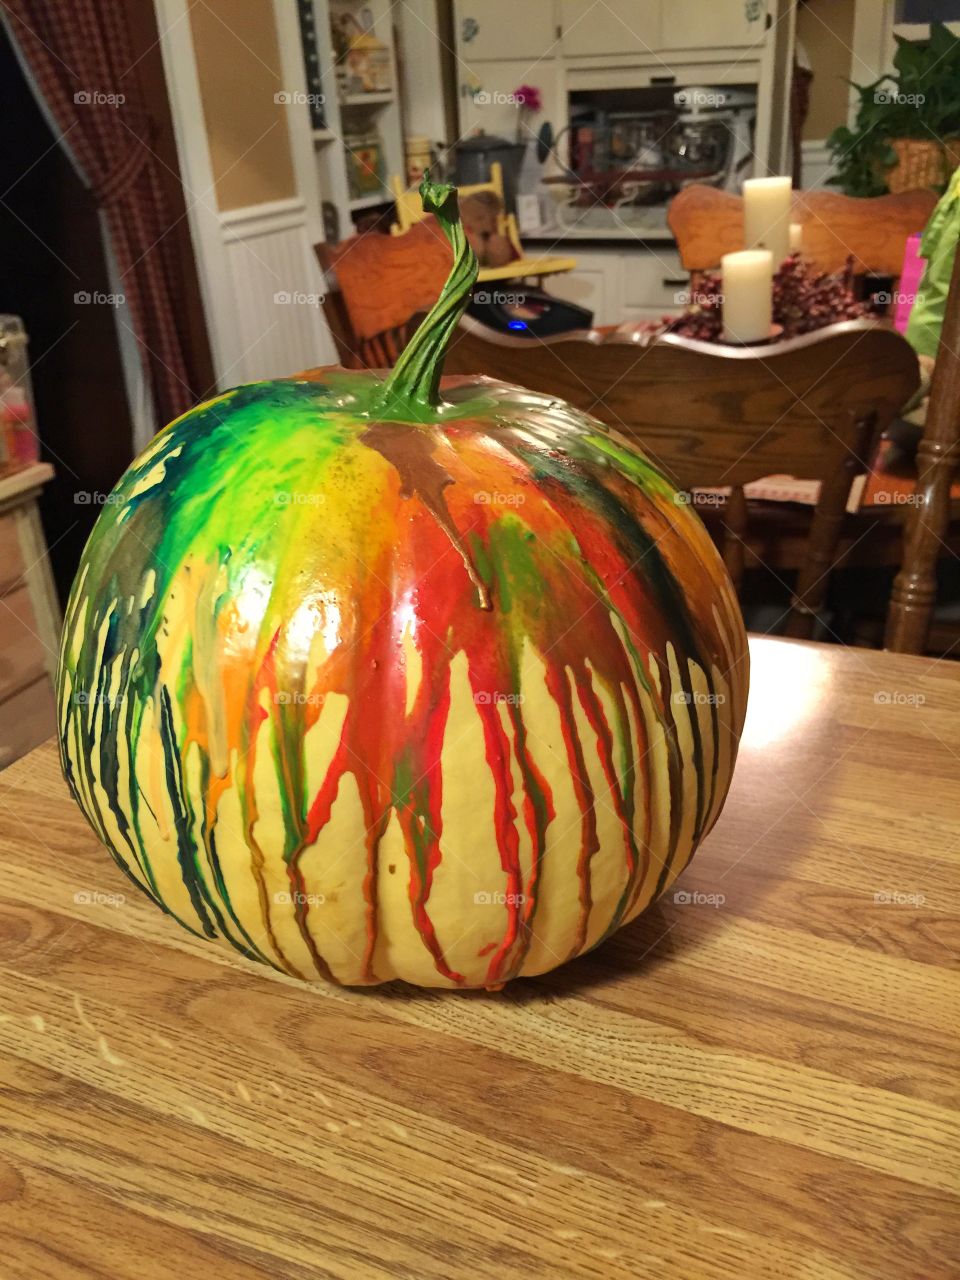 My painted pumpkin . My pumpkins turned out pretty awesome! 